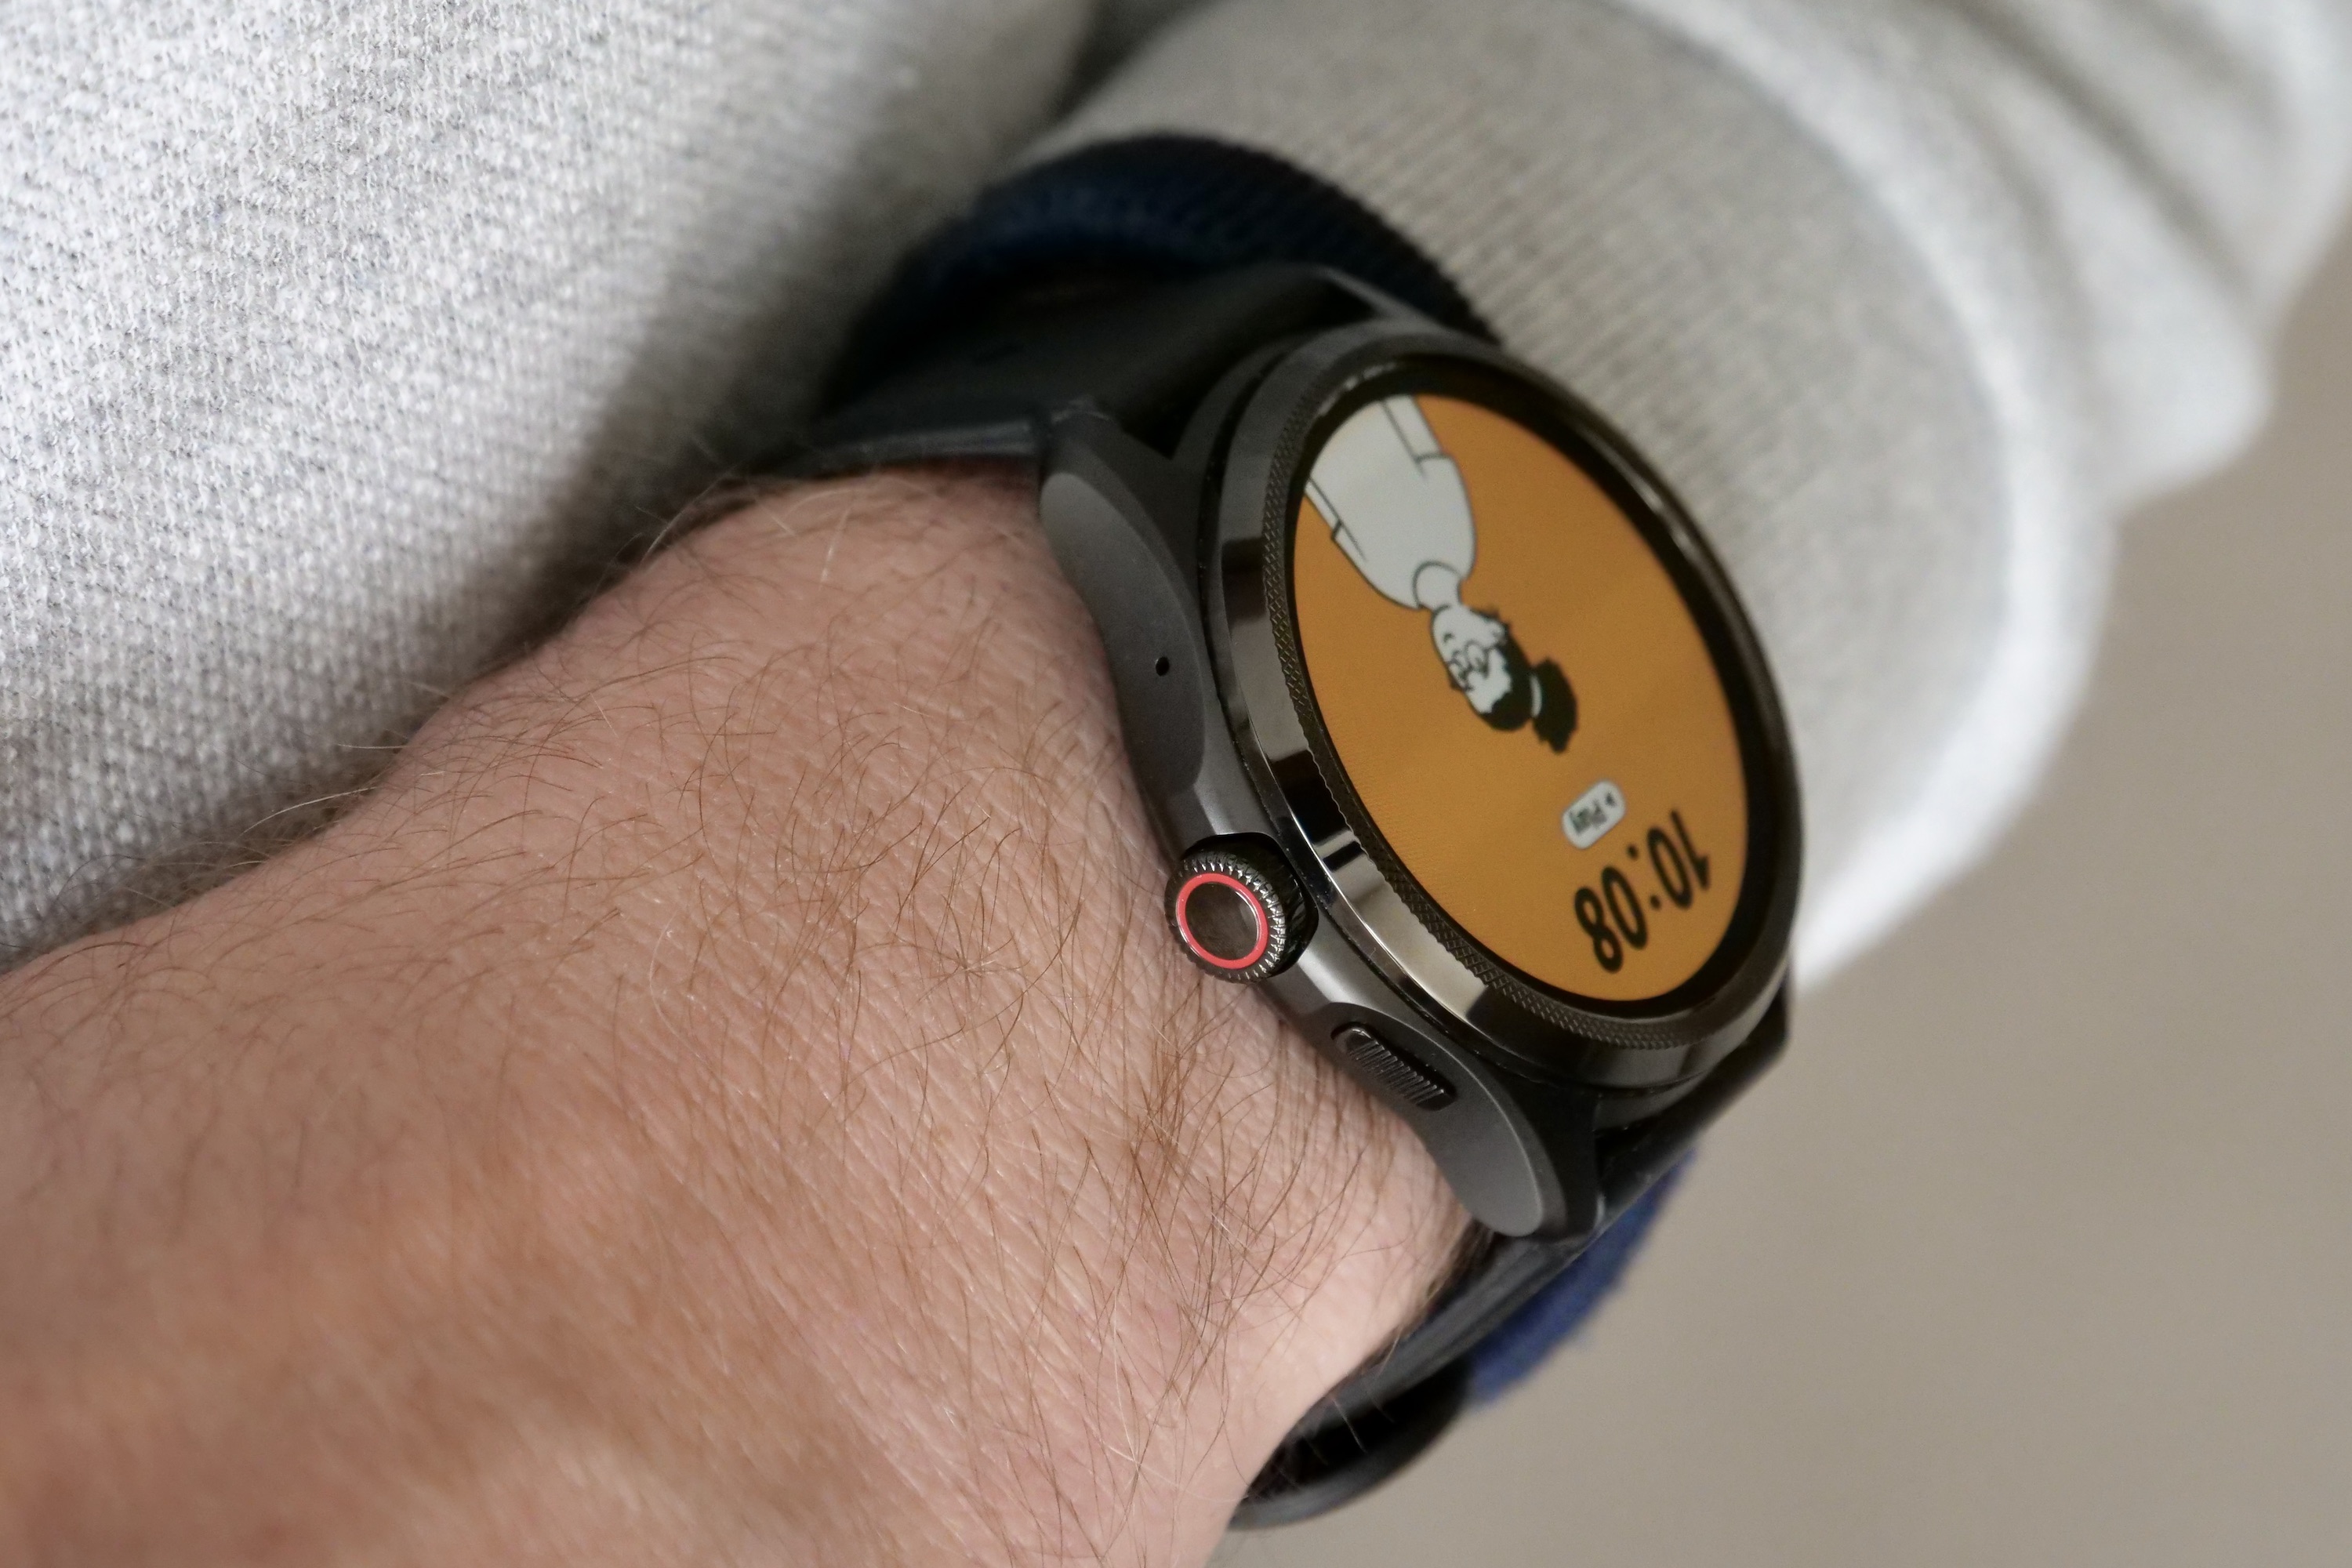 The Mobvoi TicWatch Pro 5 on a person's wrist.